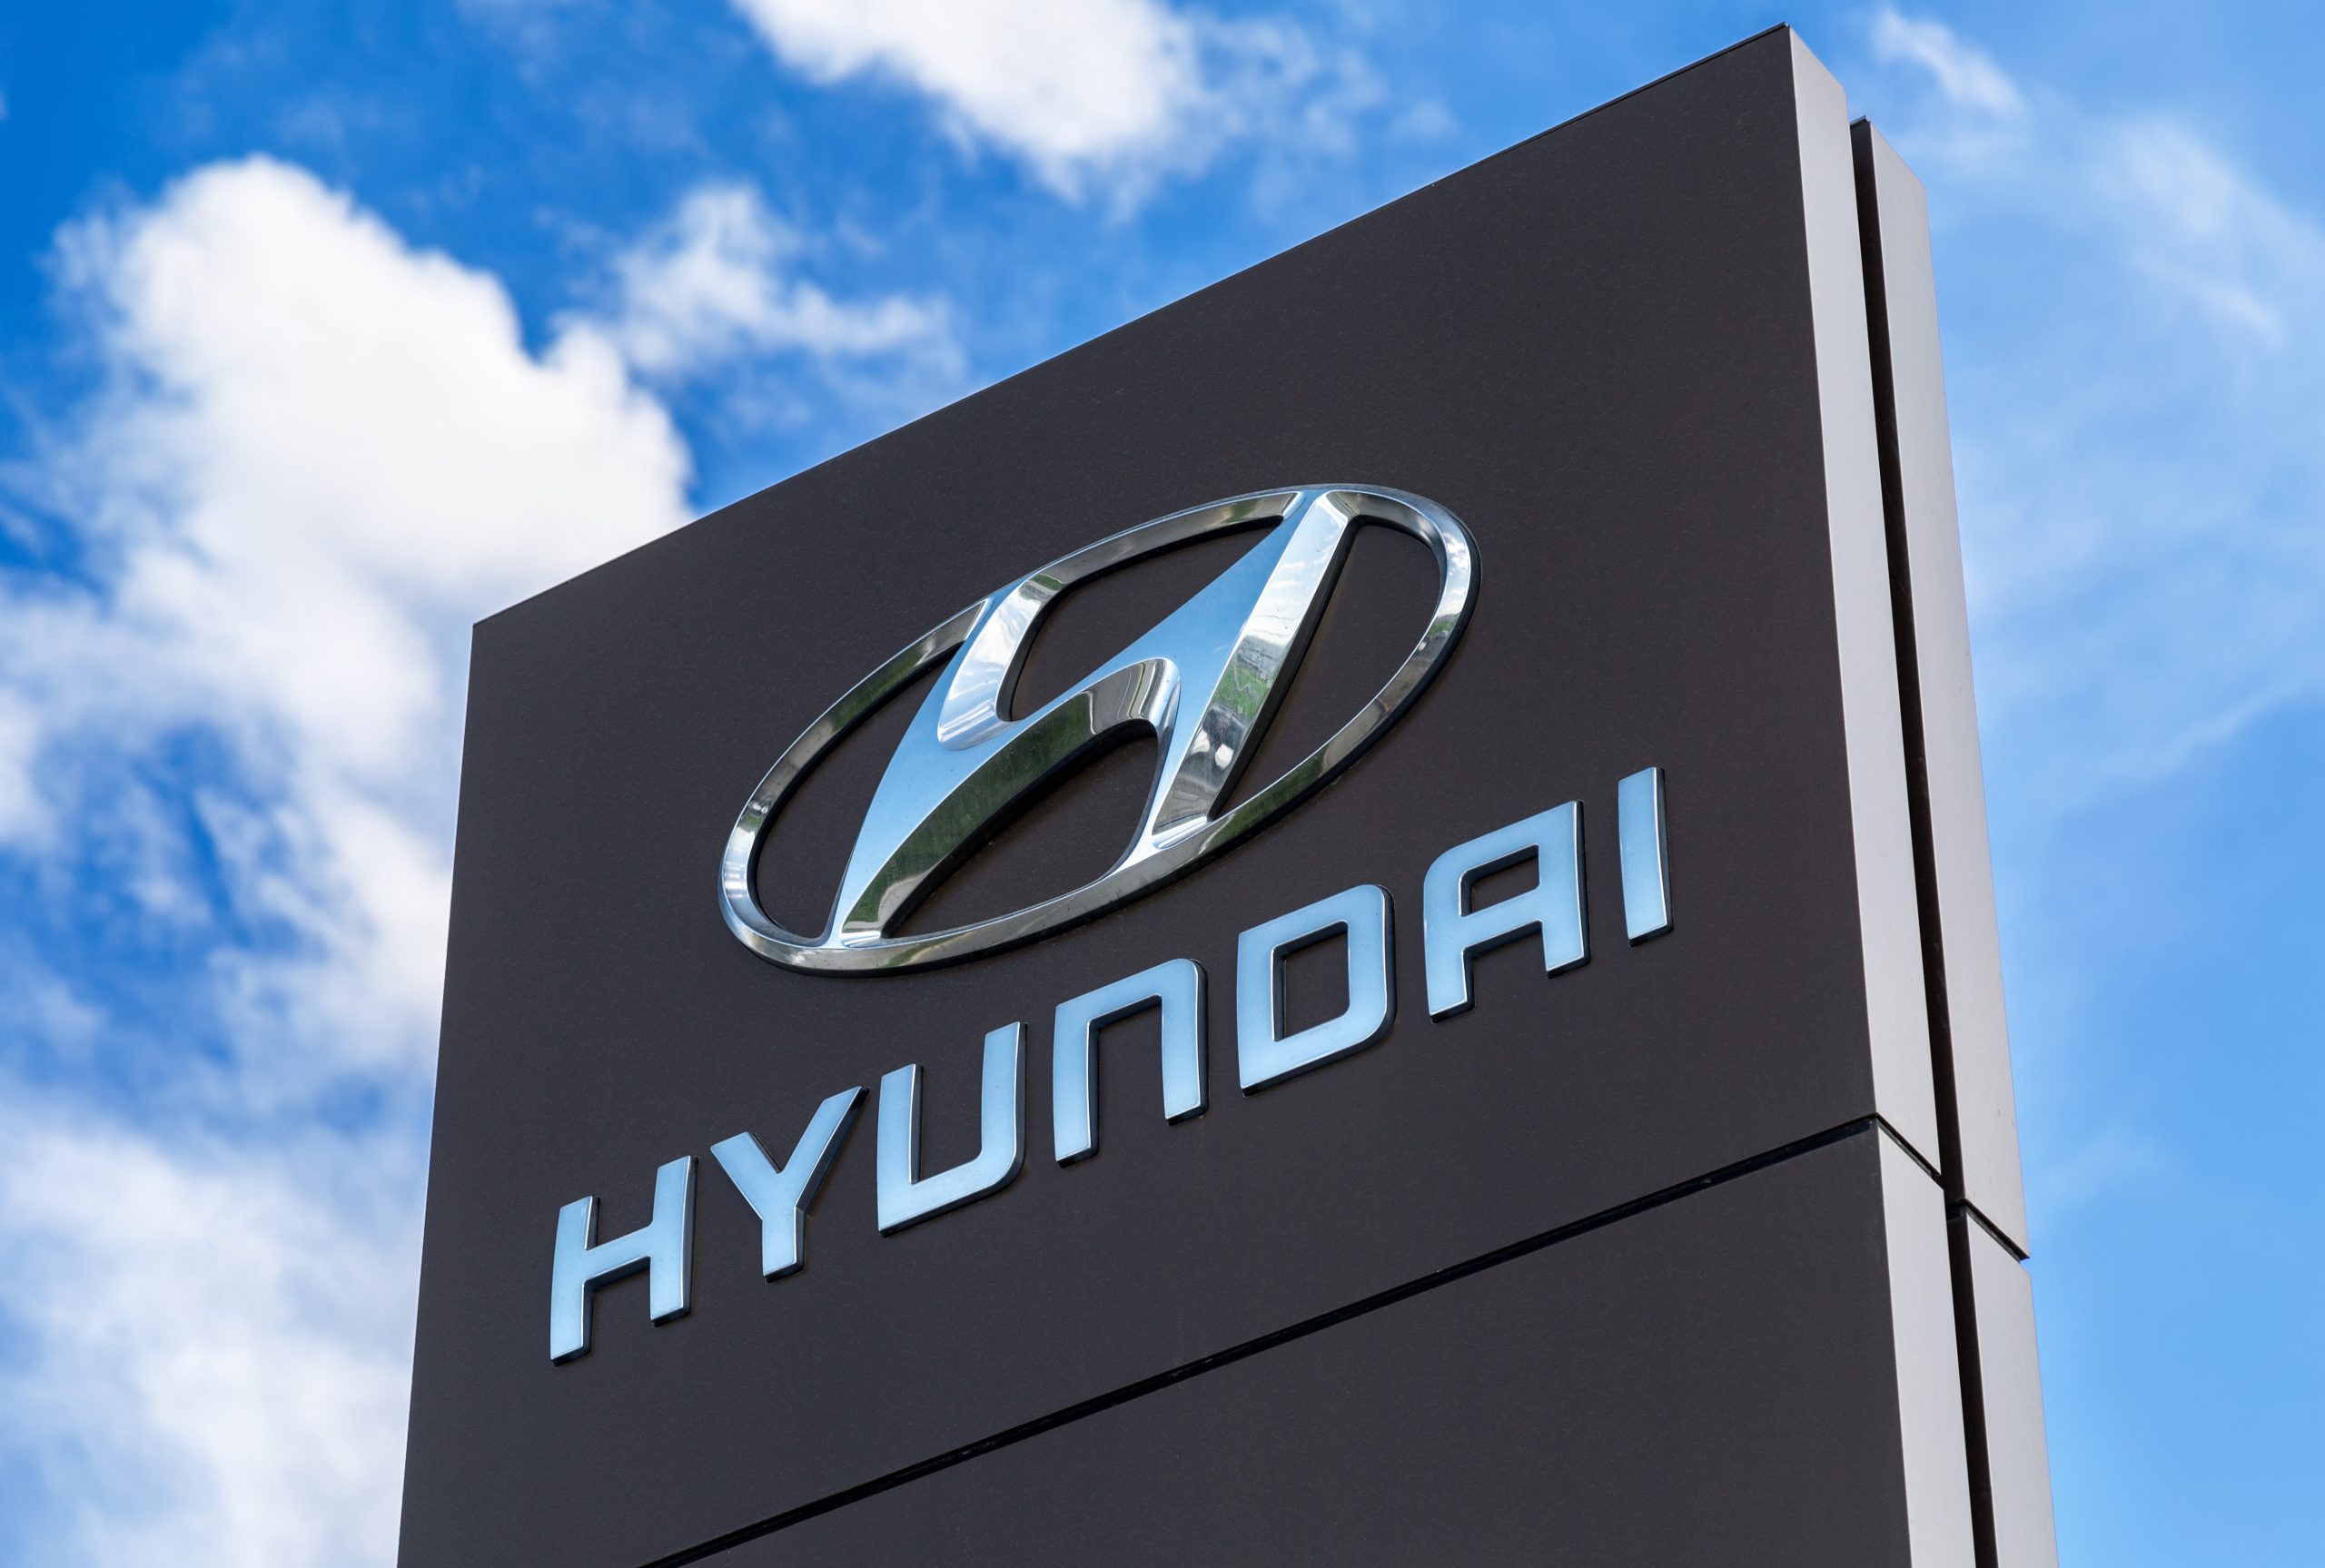 Hyundai Motor Drives Sustainable Clean Logistics in U.S. with Vision for Hydrogen Society